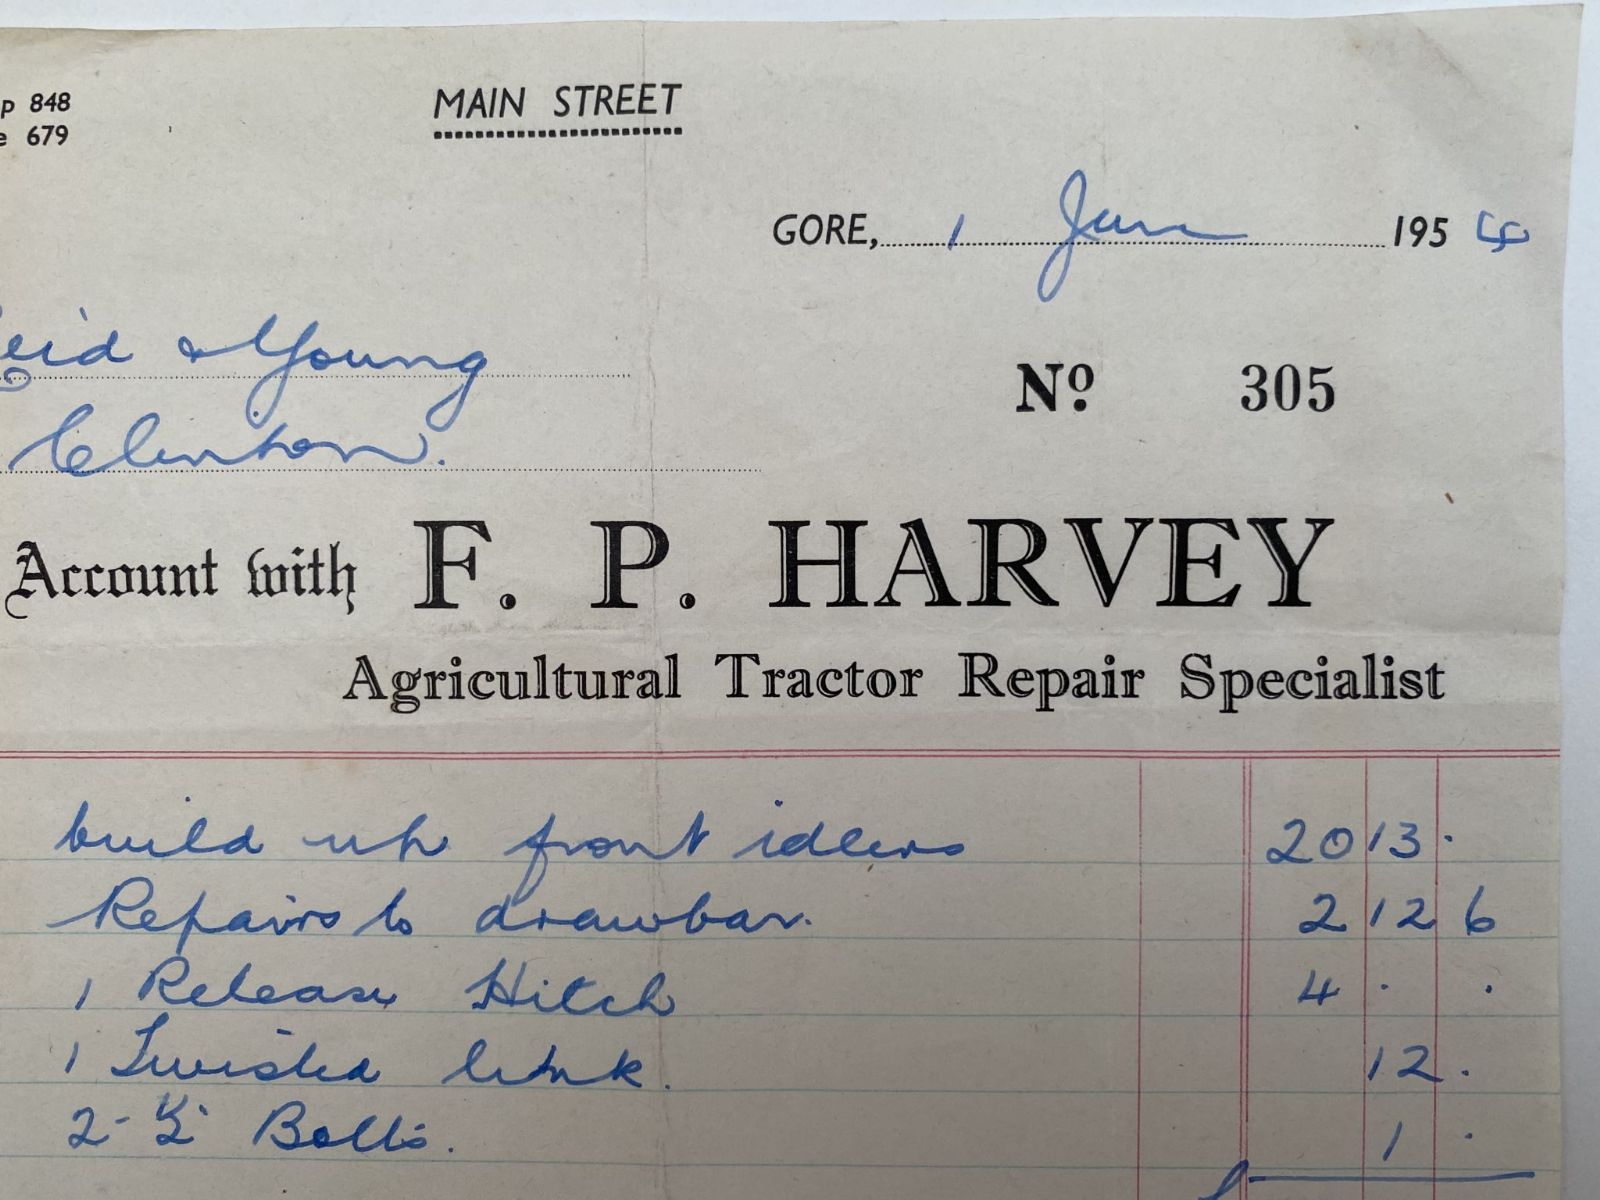 OLD INVOICE / RECEIPT: F. P. Harvey, Gore - Agricultural Tractor Repairs 1954